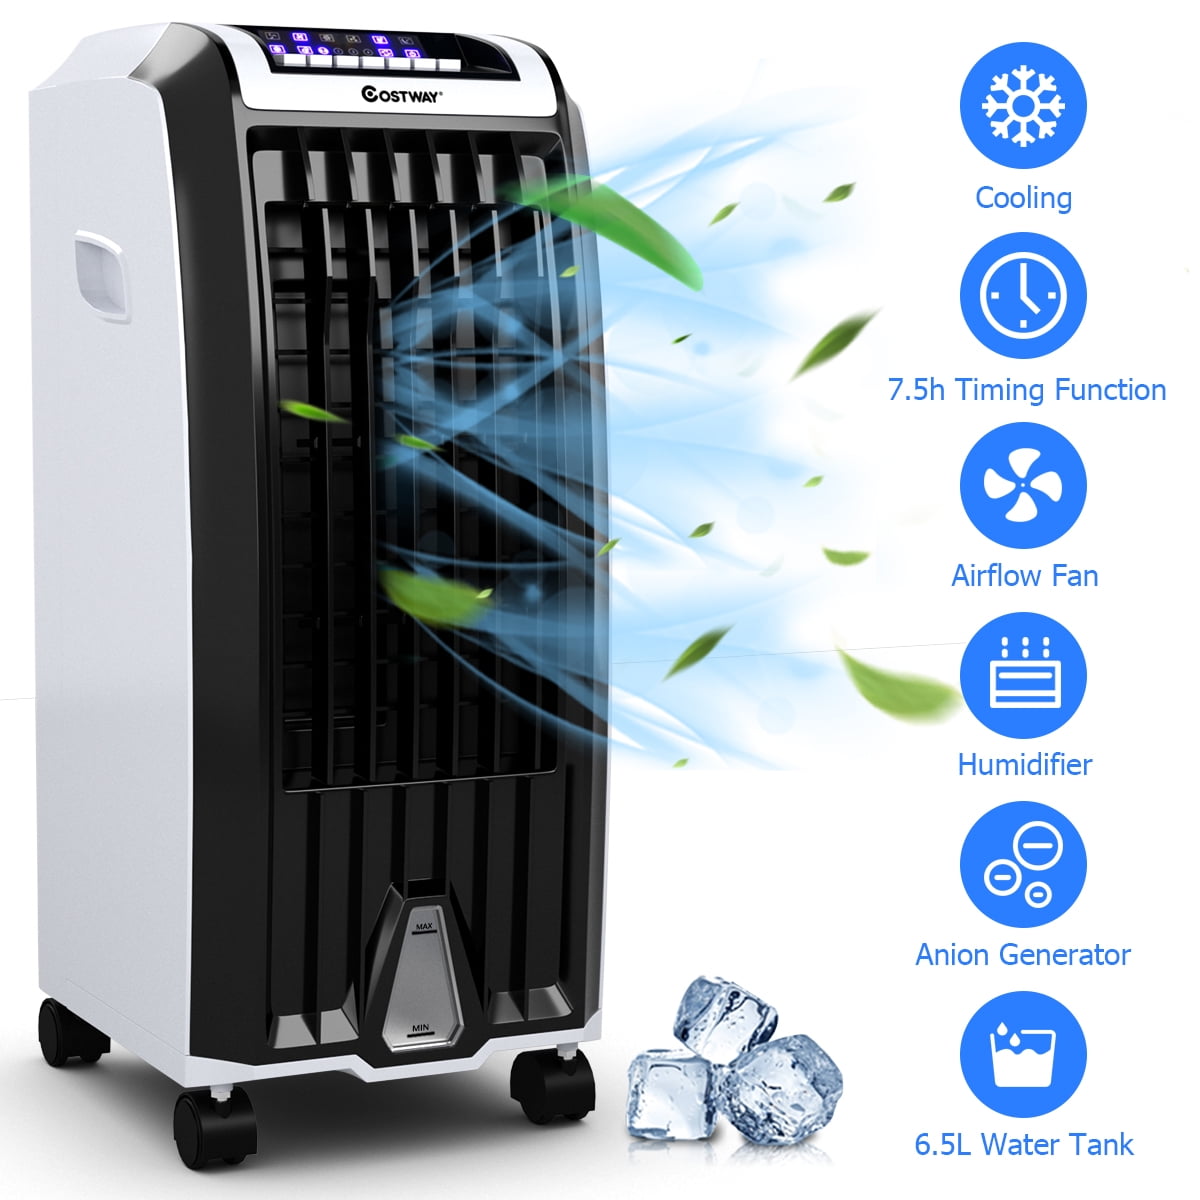 Portable Air Conditioner Cooler Fan Humidifier Evaporative Air Cooling Cool Fans